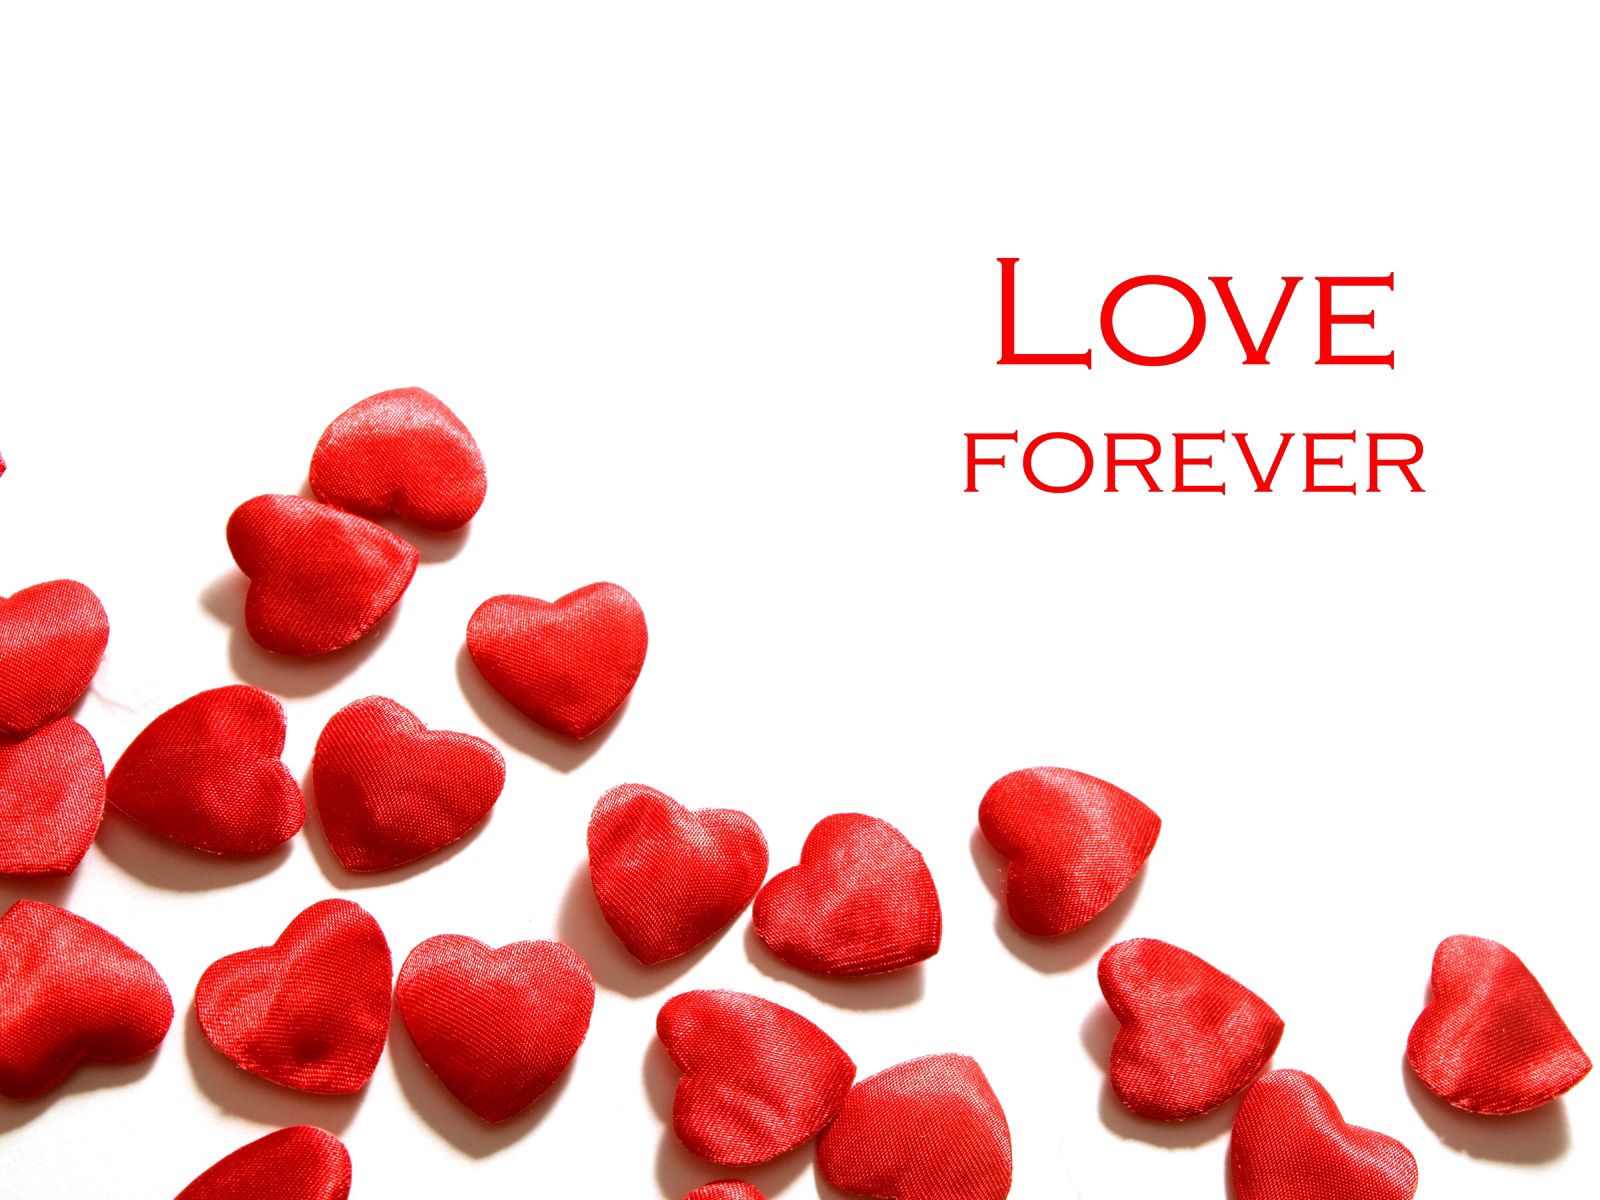 forever, love, red, heart, forever and ever